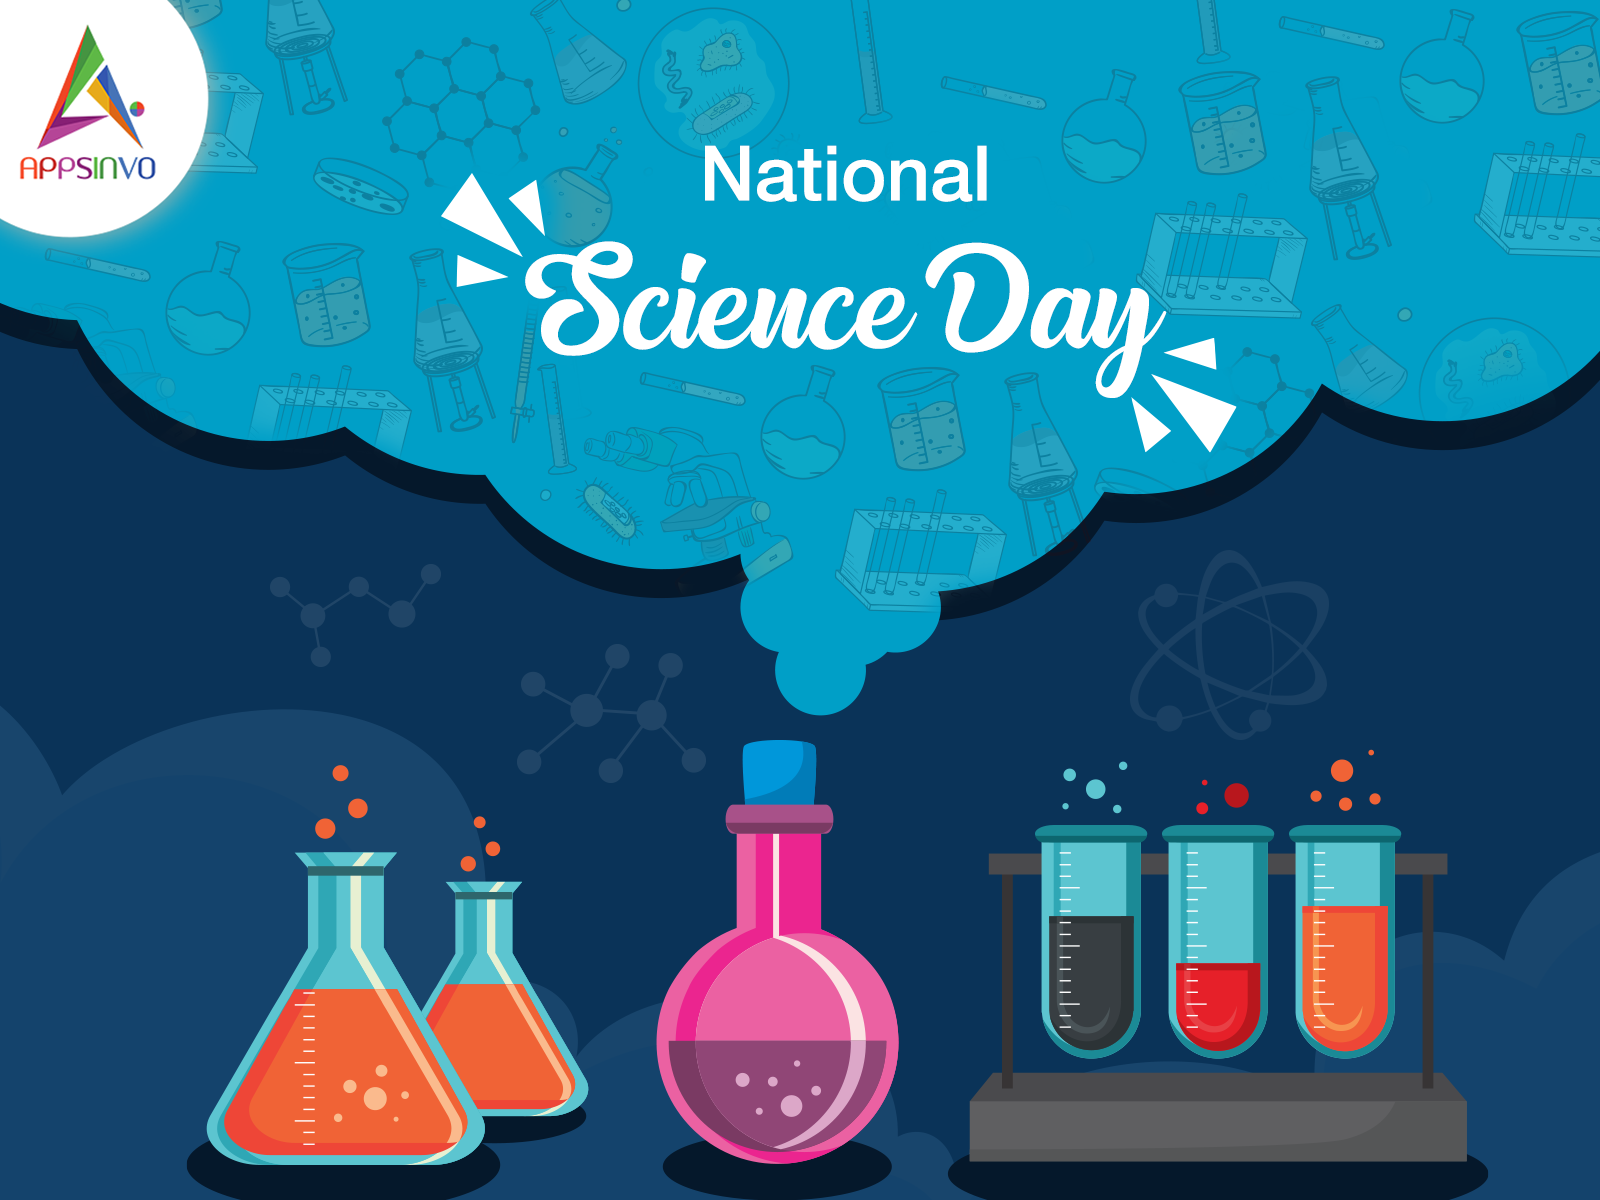 Happy National Science Day 2020 by Appsinvo on Dribbble